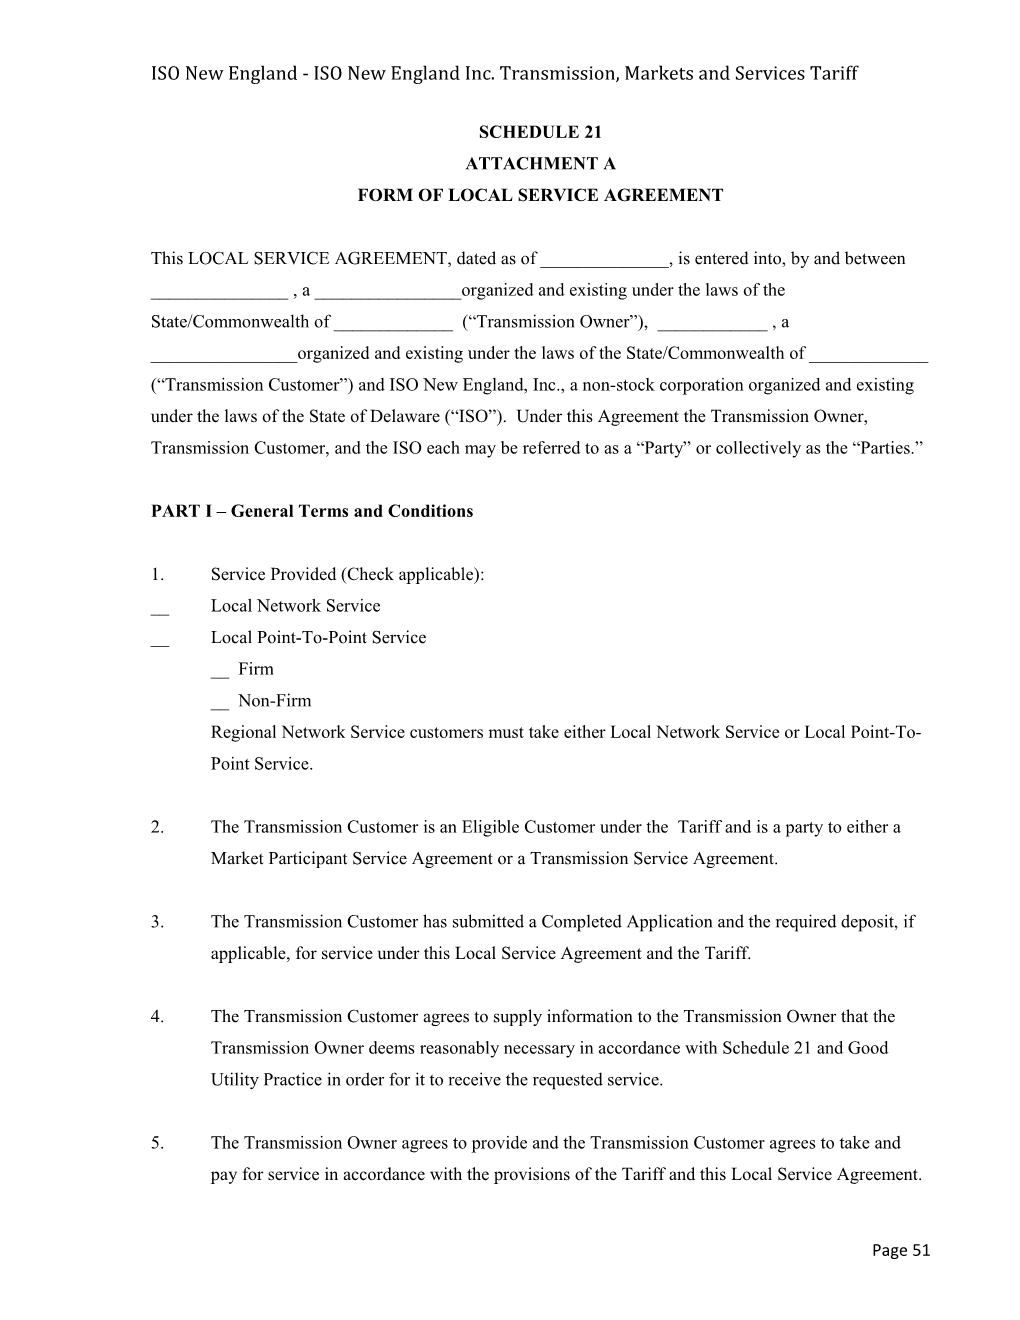 Form of Local Service Agreement